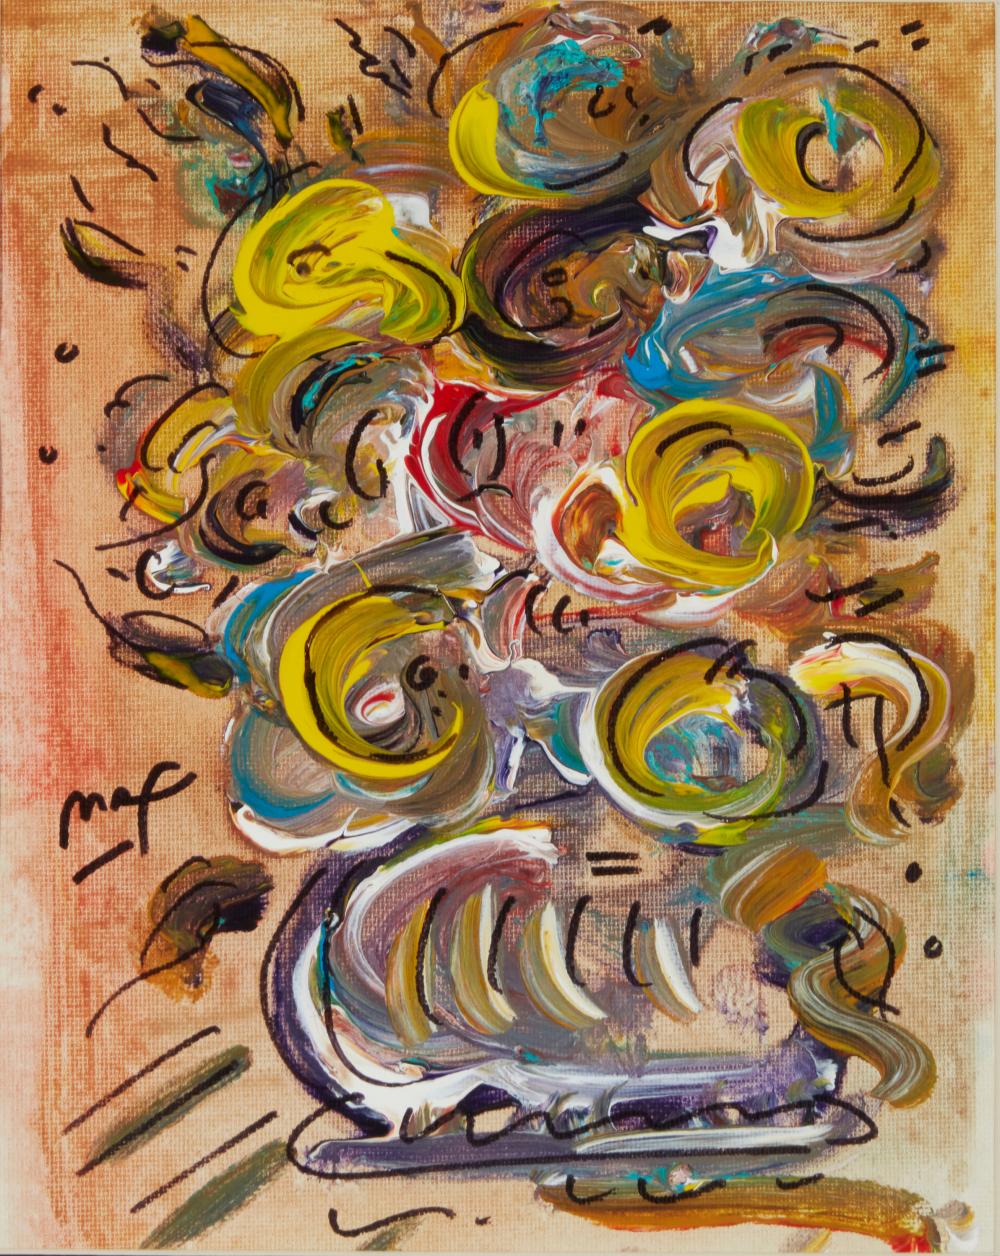 PETER MAX B 1937 ABSTRACT FLORAL 2eef07